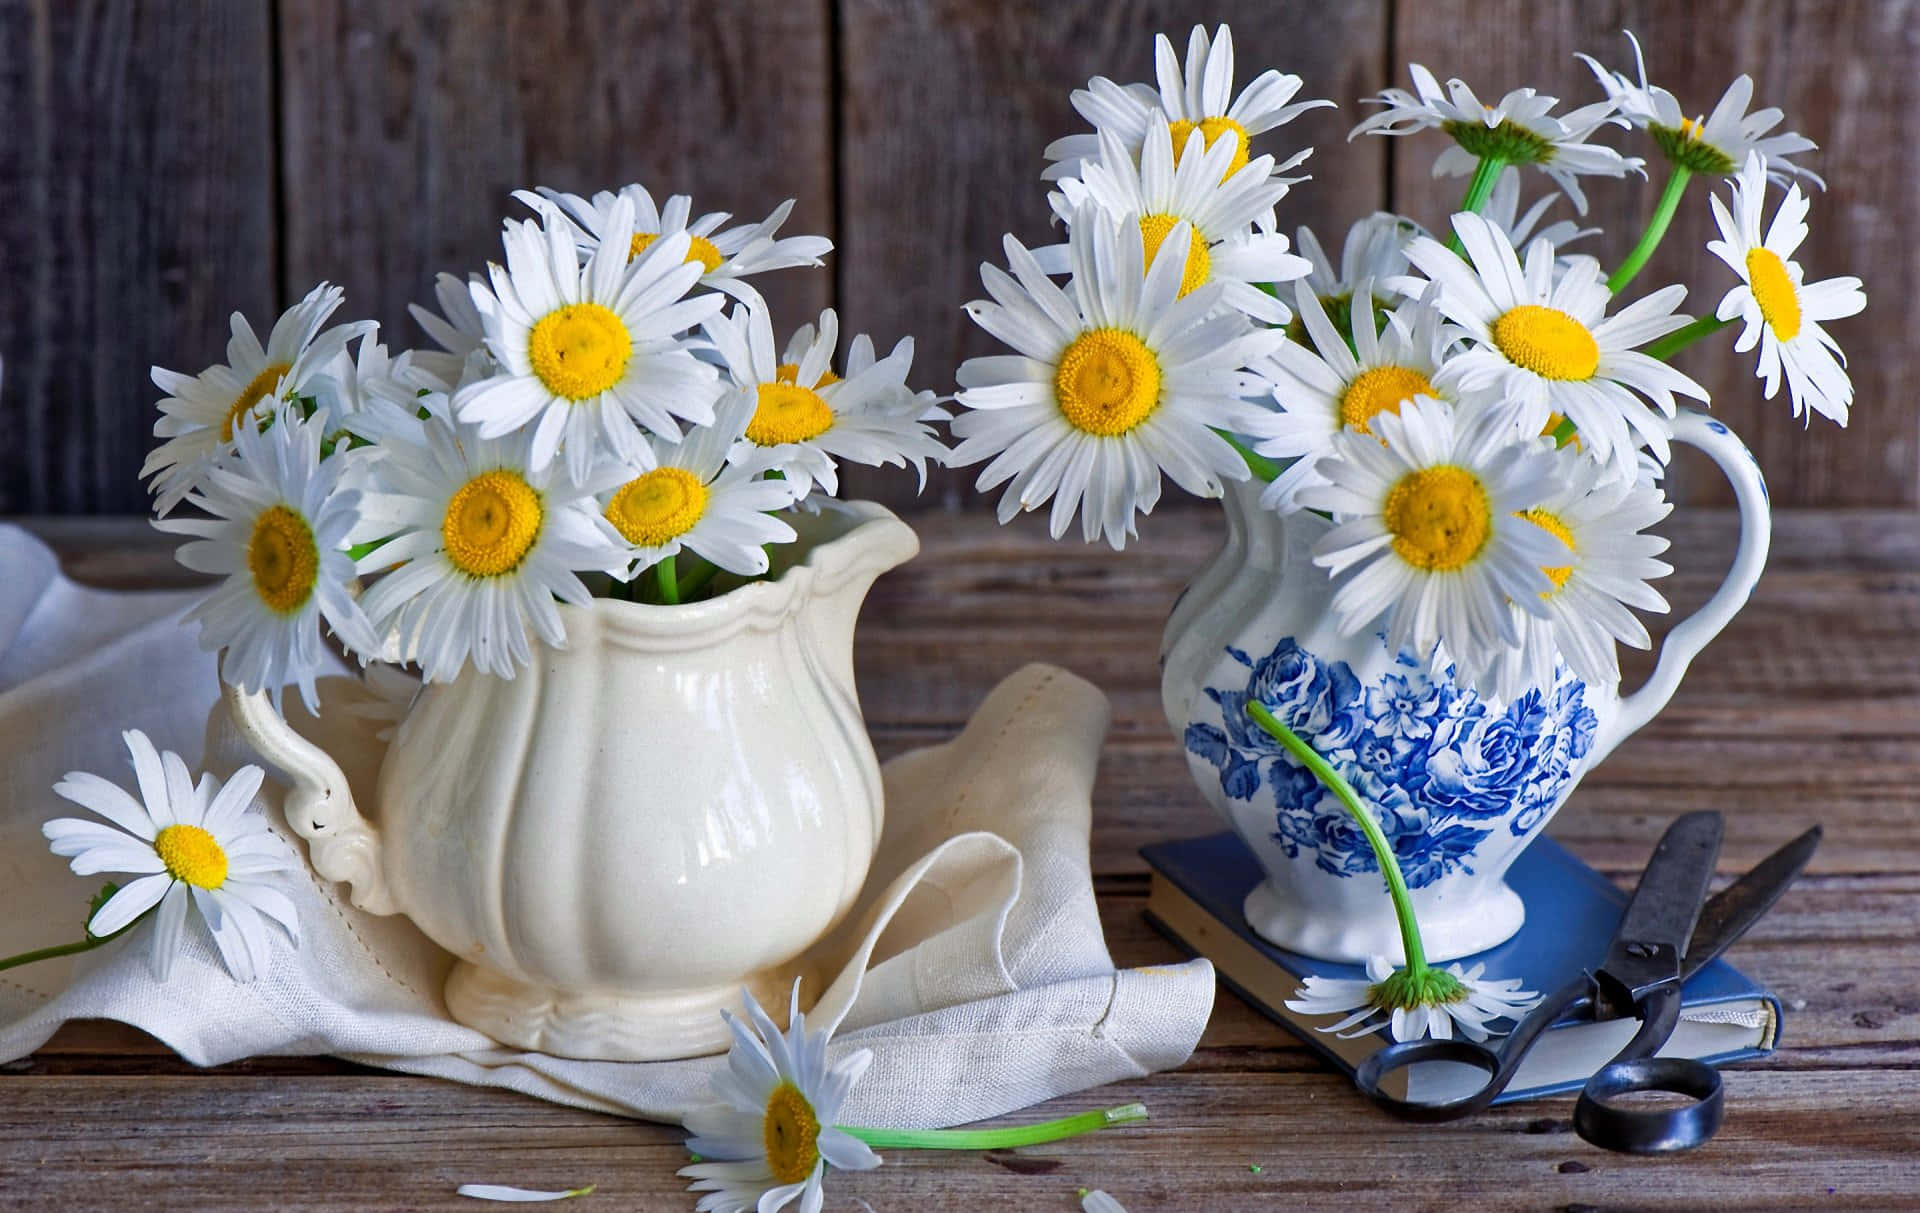 A White Vase With Daisies